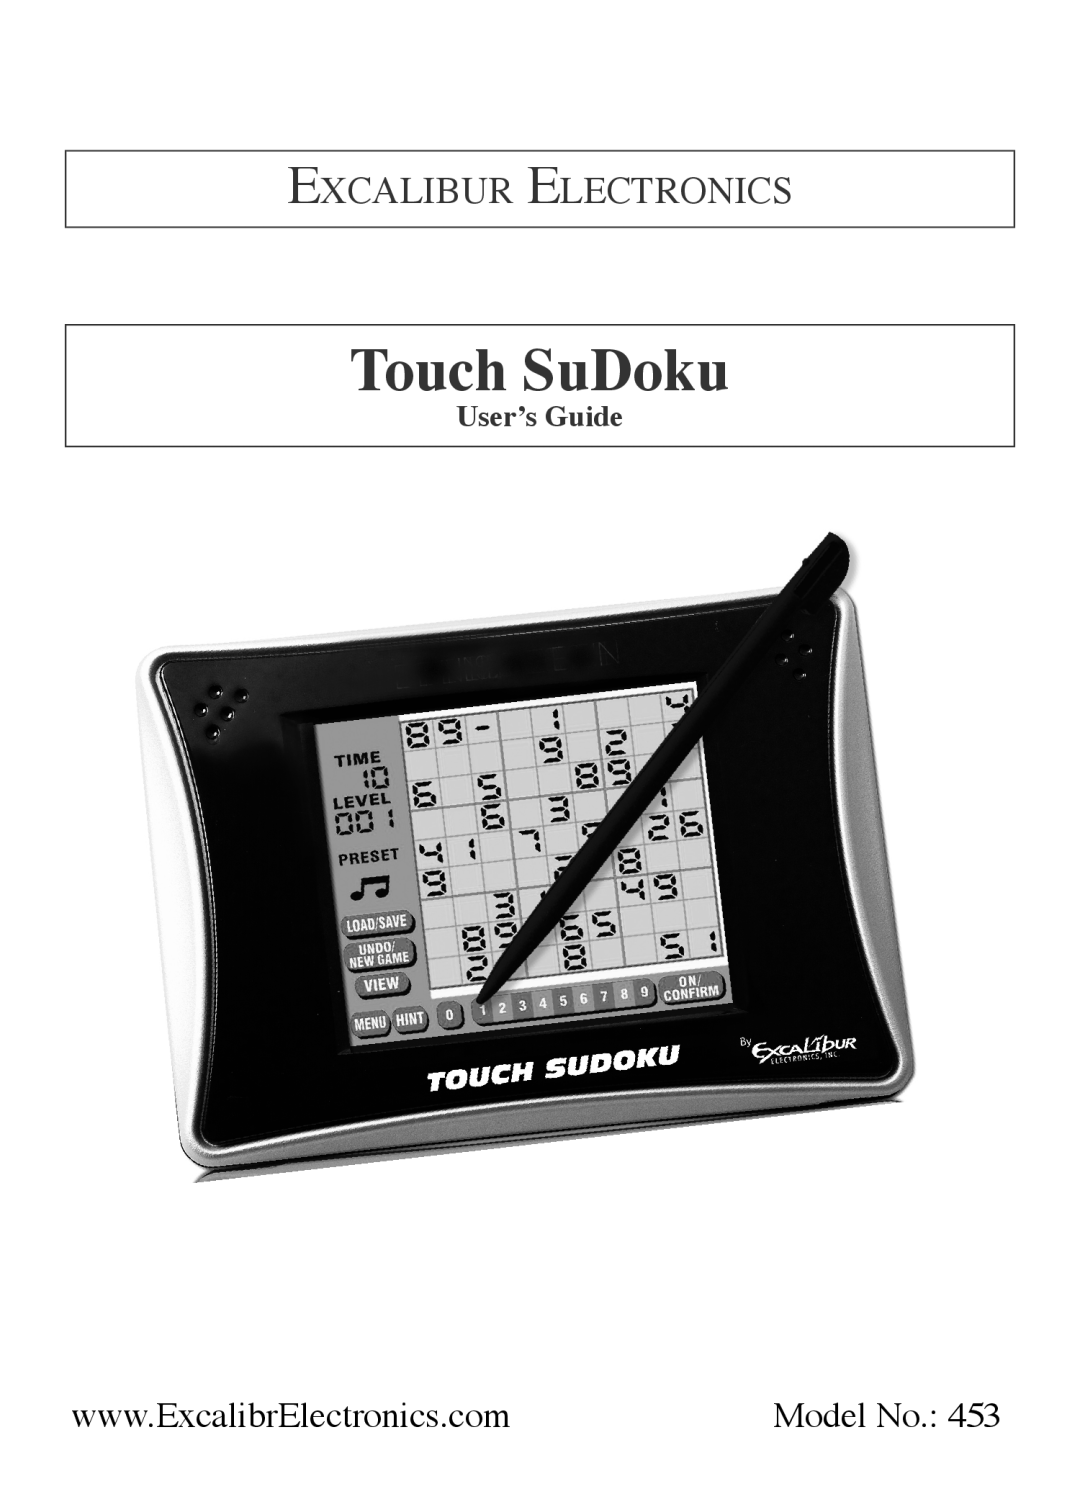 Excalibur electronic 453 manual Touch SuDoku, Excalibur Electronics, Model No, Userʼs Guide 